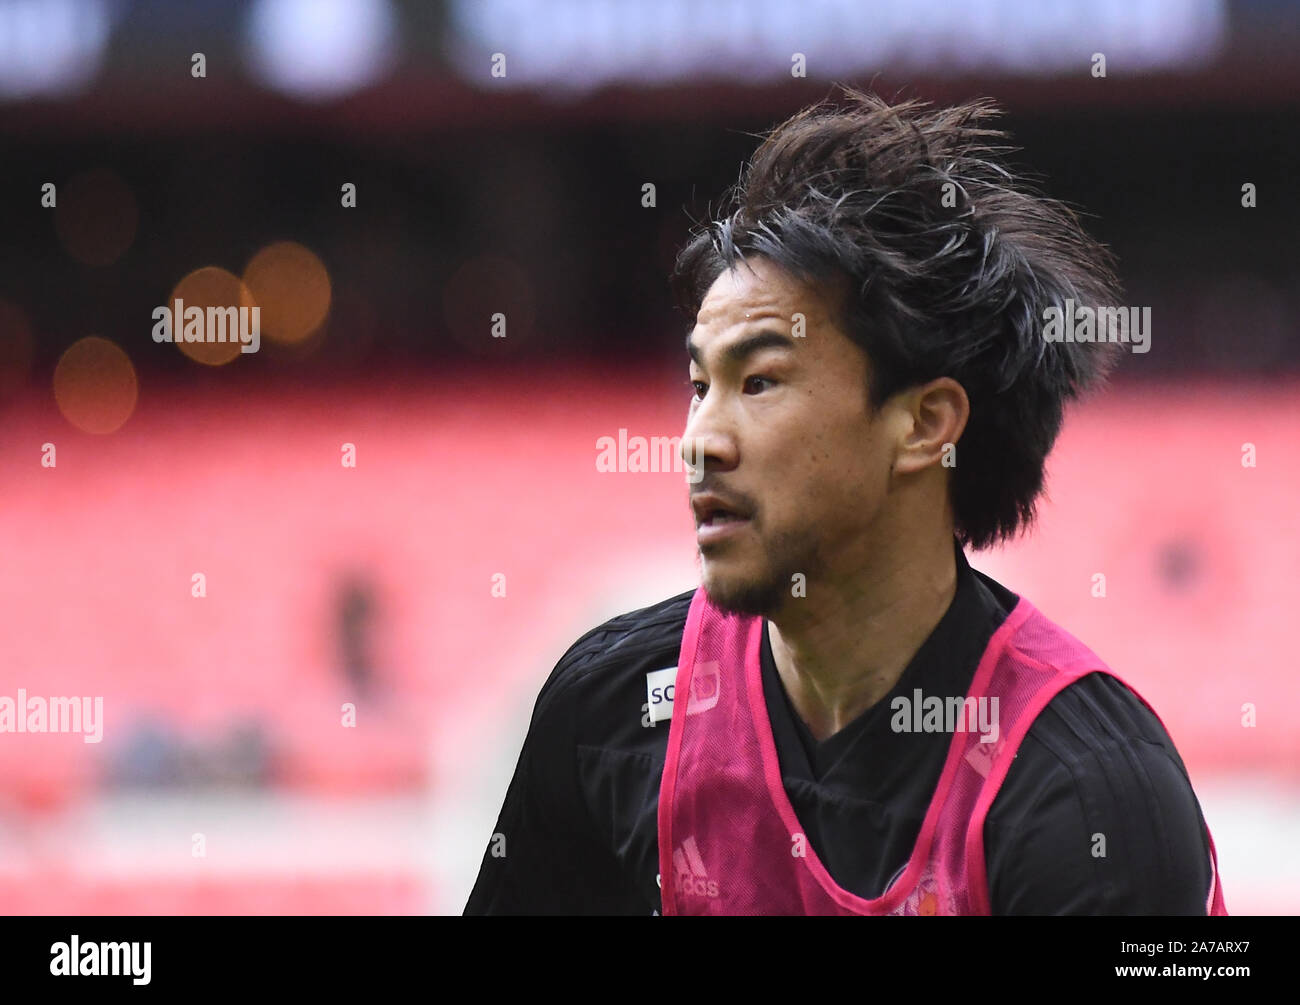 LONDON, ENGLAND - FEBRUARY 10, 2019: Shinji Okazaki of Leicester pictured ahead of the 2018/19 Premier League game between Tottenham Hotspur and Leicester City at Wembley Stadium. Stock Photo